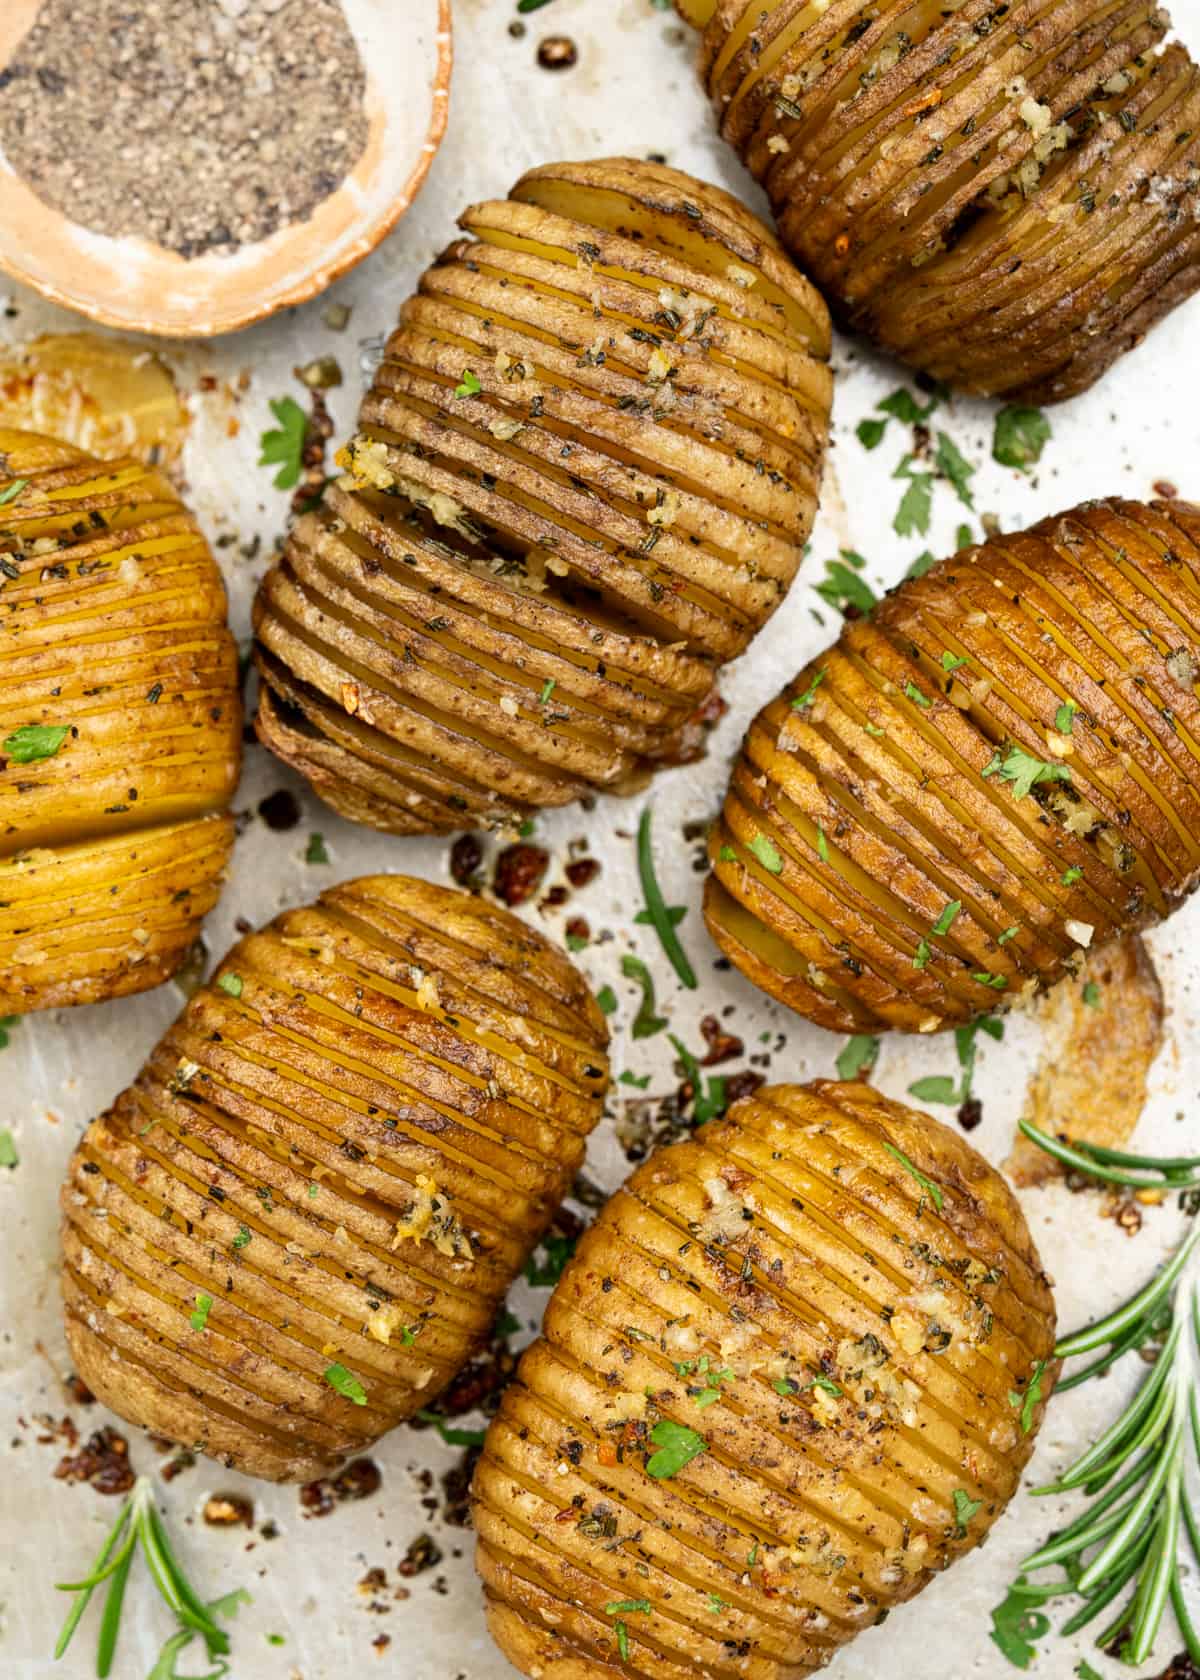 Hasselback Potatoes are a fun way to serve baked potatoes. Potatoes are sliced thin, flavoured with garlic rosemary butter, then baked until they are crispy on the outside and cooked perfectly on the inside. 